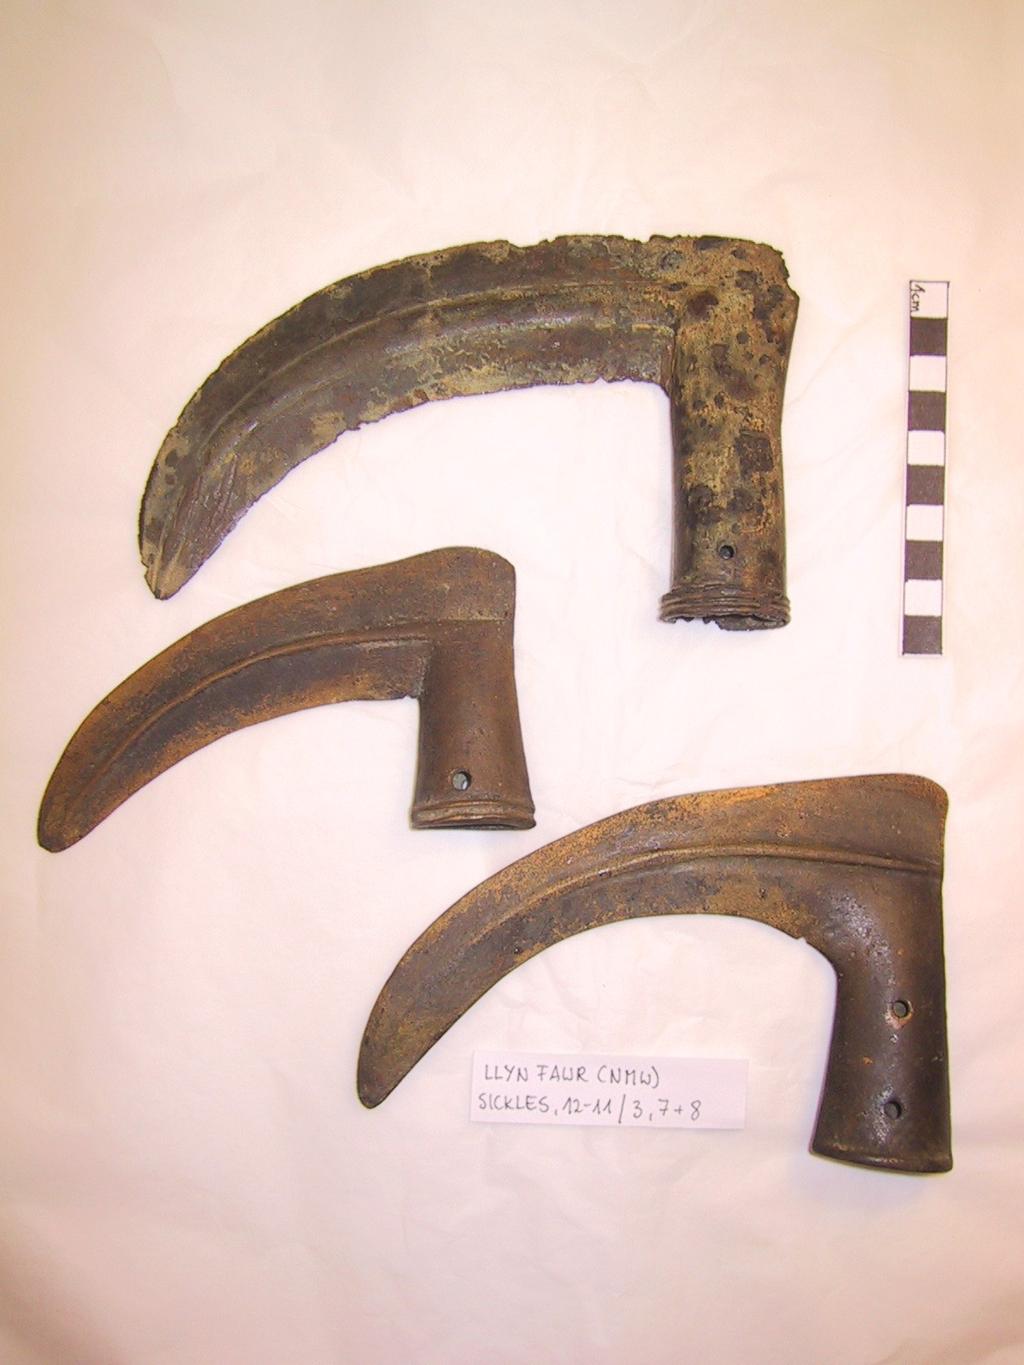 Page 10 Fig. 4 (L): Three sickles from Llyn Fawr, Glamorgan, by permission of the National Museum of Wales Fig.